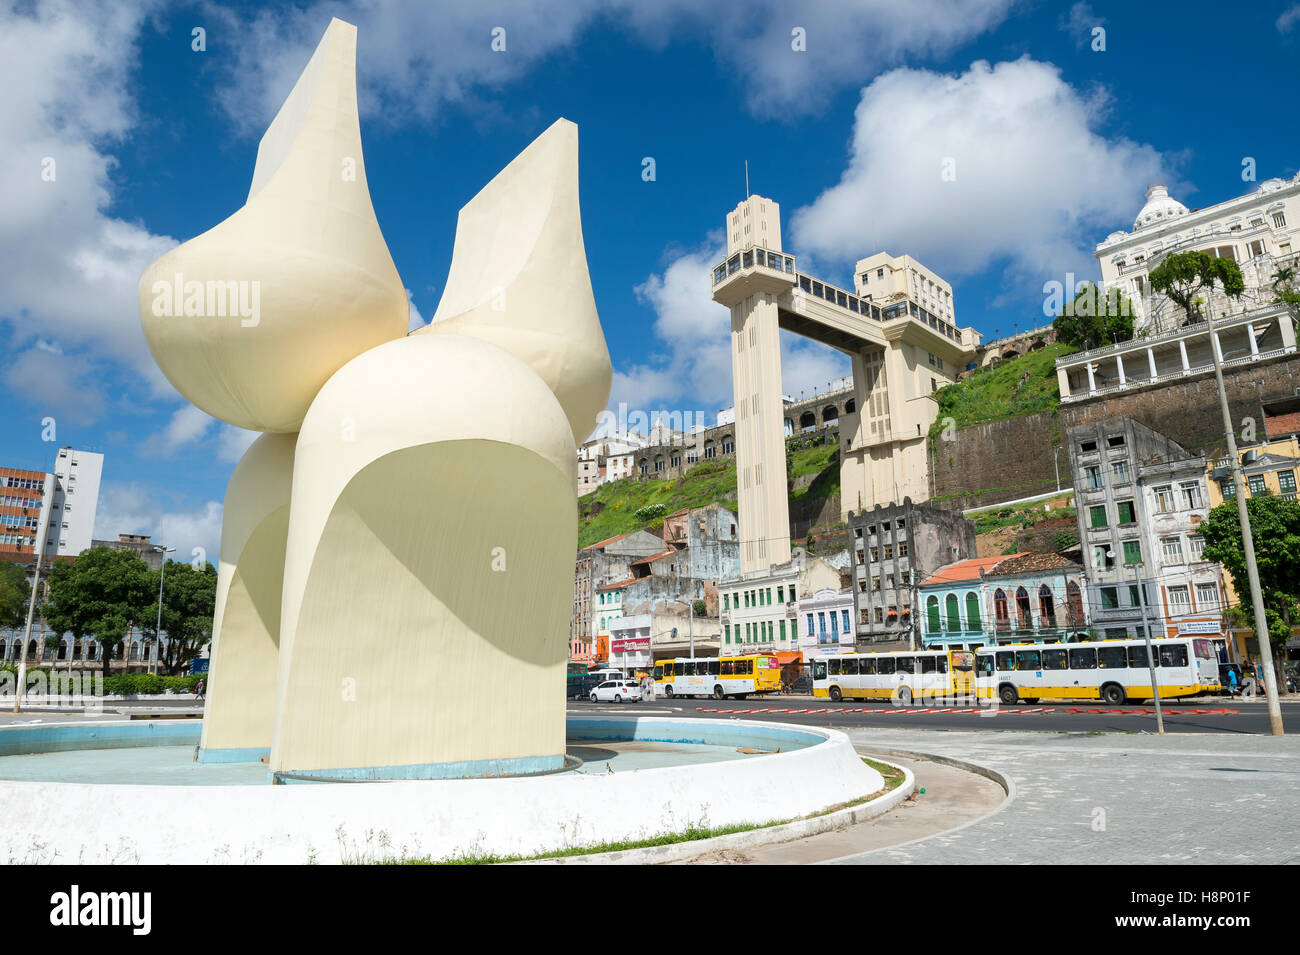 SALVADOR, BRAZIL - MARCH 12, 2015: Modern sculpture known locally as the " bunda" dominates the view of the city skyline Stock Photo - Alamy